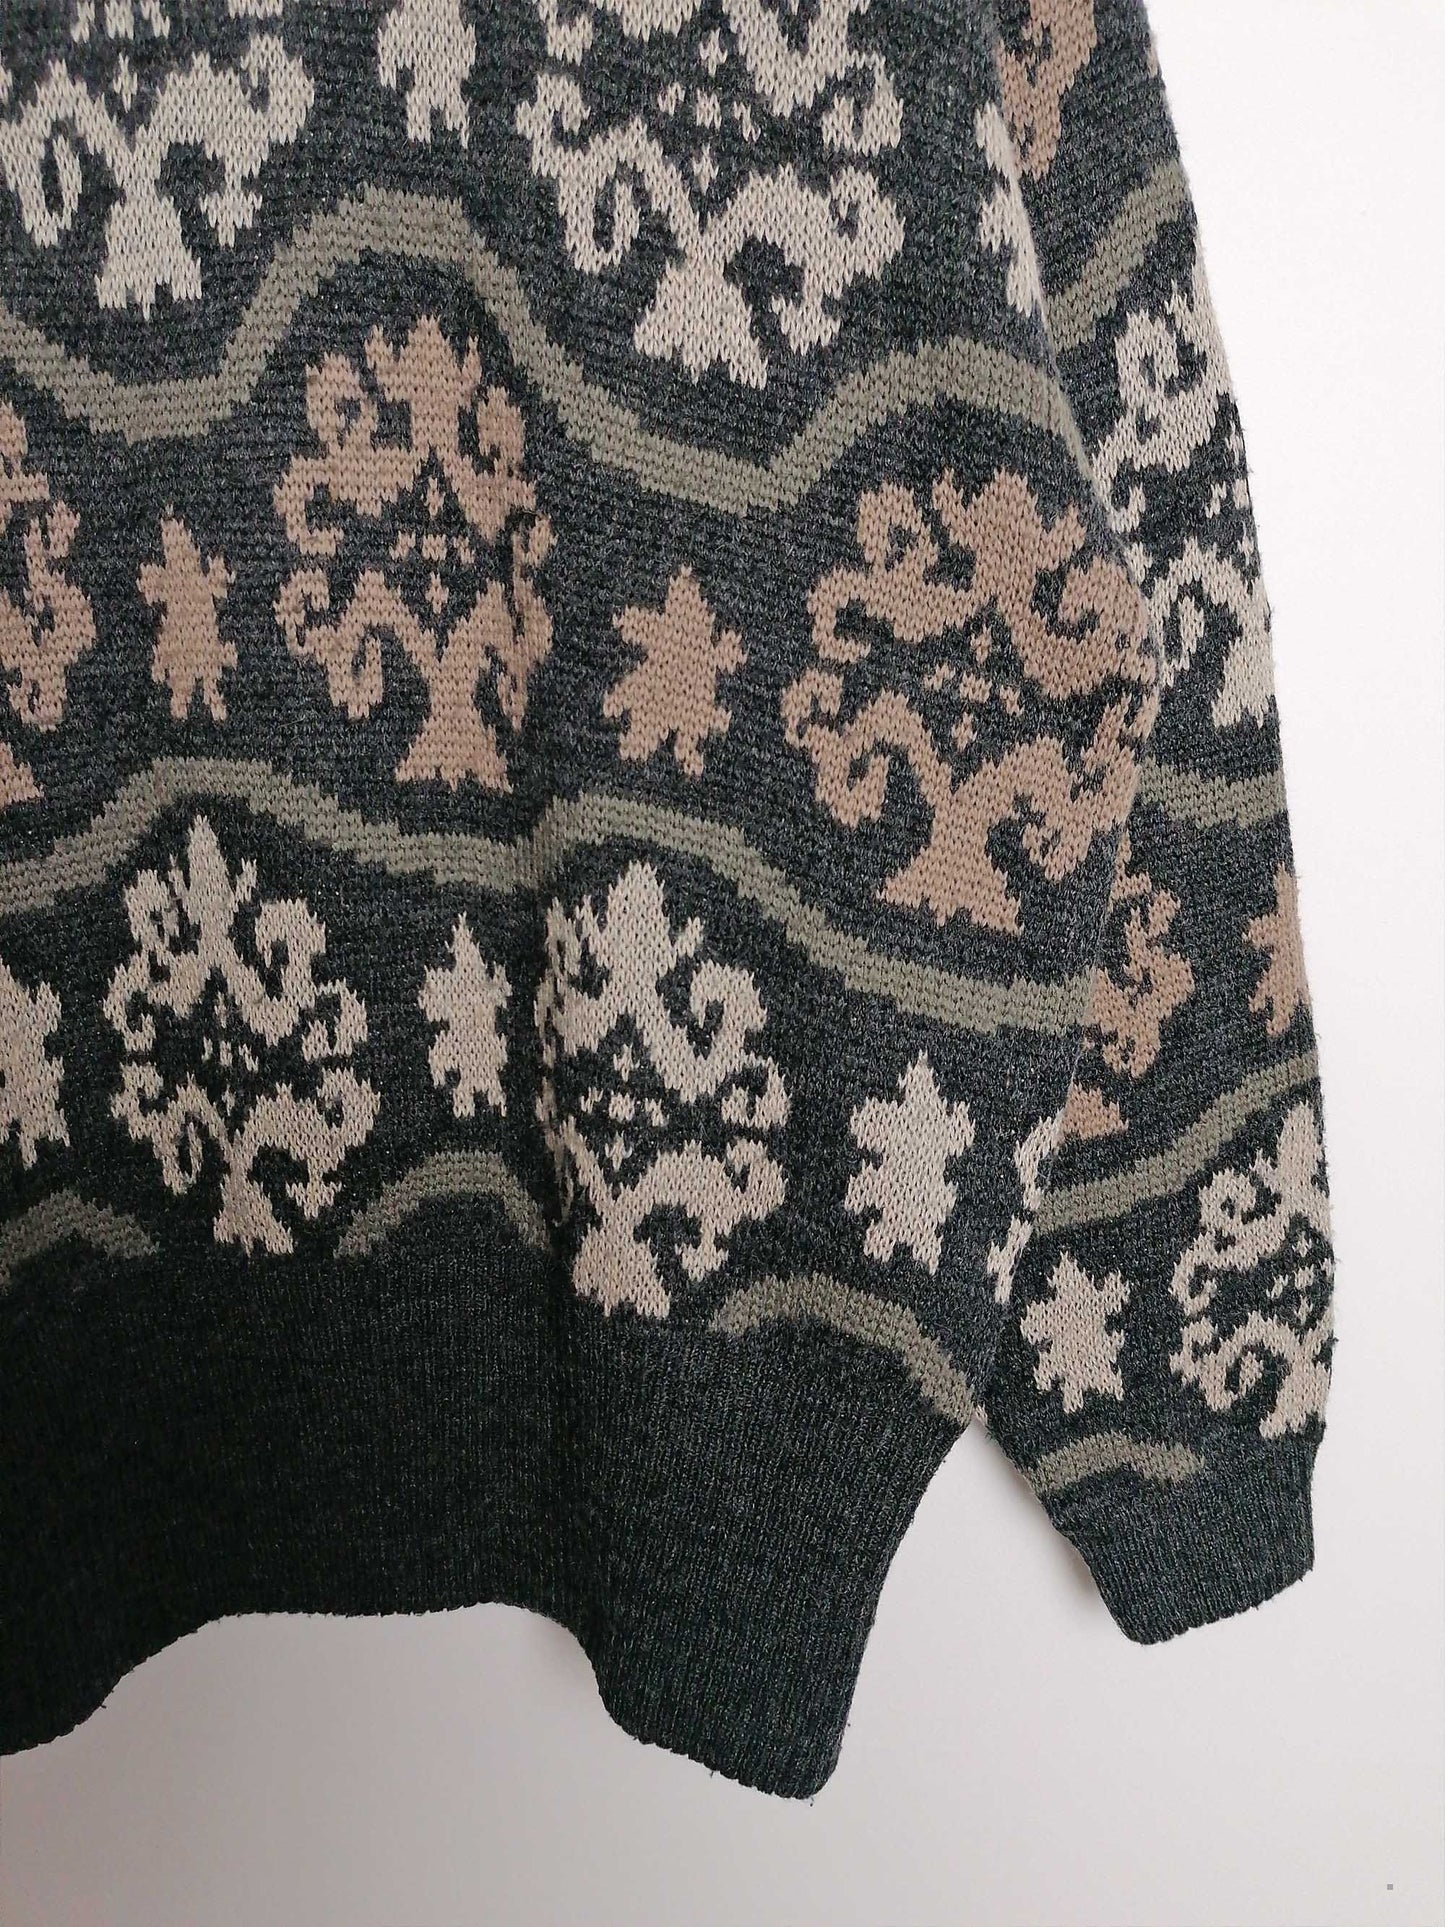 Vintage 90's ESPRIT Chunky Sweater - size M